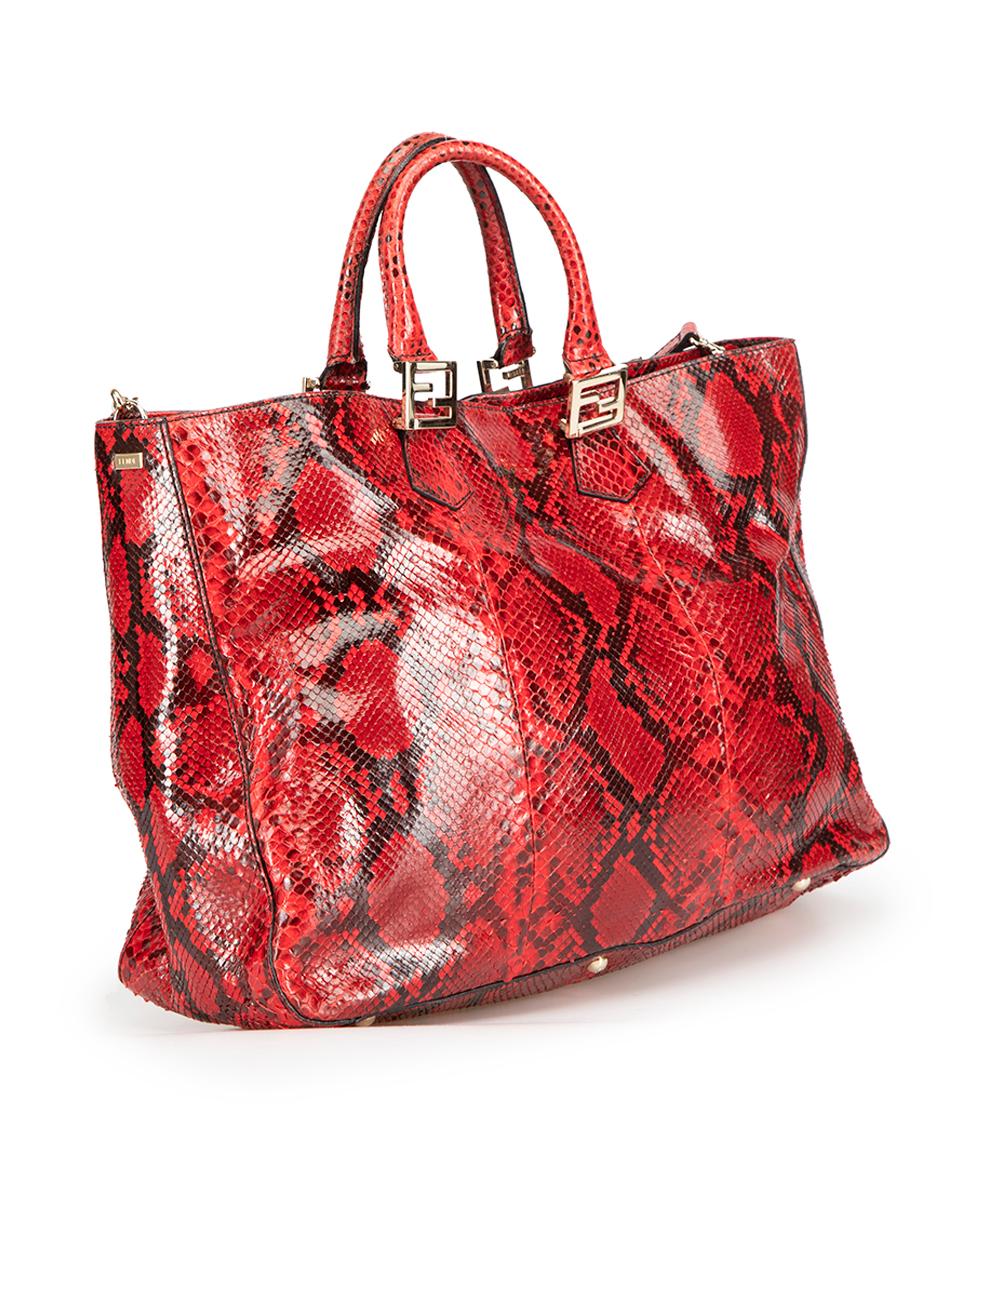 CONDITION is Very good. Minimal wear to bag is evident. Minimal wear to the hardware with faint scuff marks and tarnishing to the internal clasp on this used Fendi designer resale item.



Details


Red

Snakeskin leather

Large handbag

Gold tone